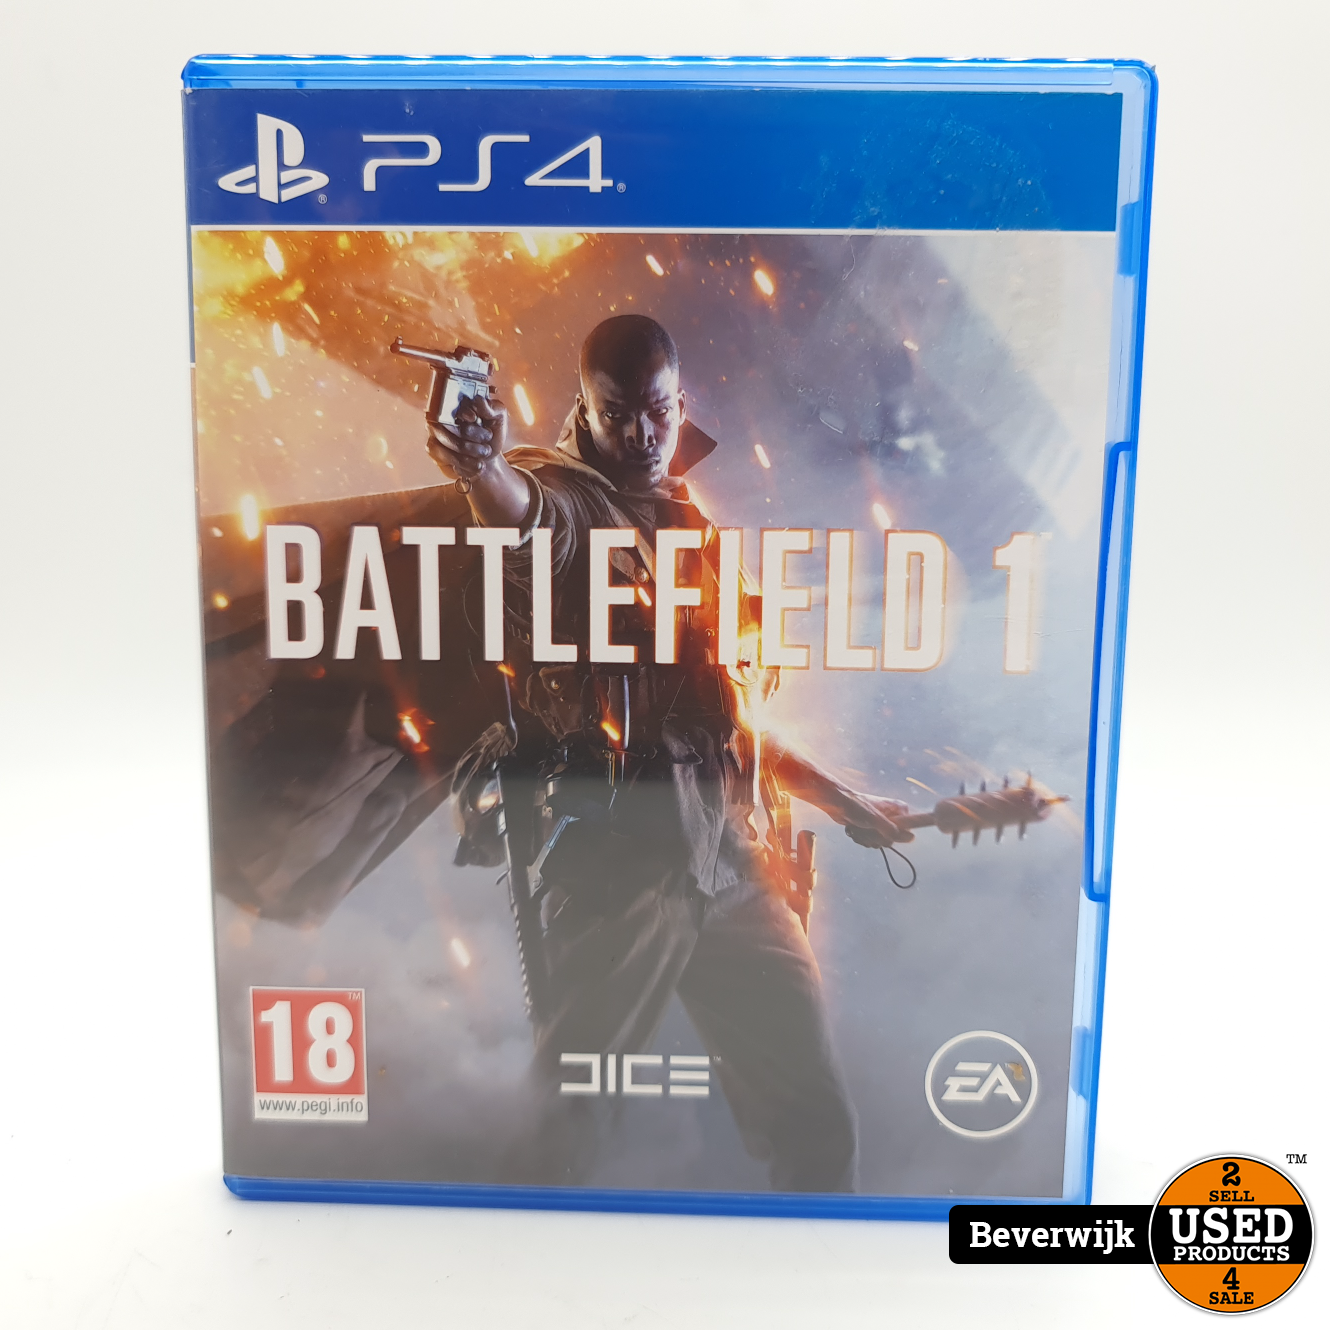 thuis glas Dosering Playstation 4 Battlefield 1 - PS4 Game - In Nette Staat - Used Products  Beverwijk